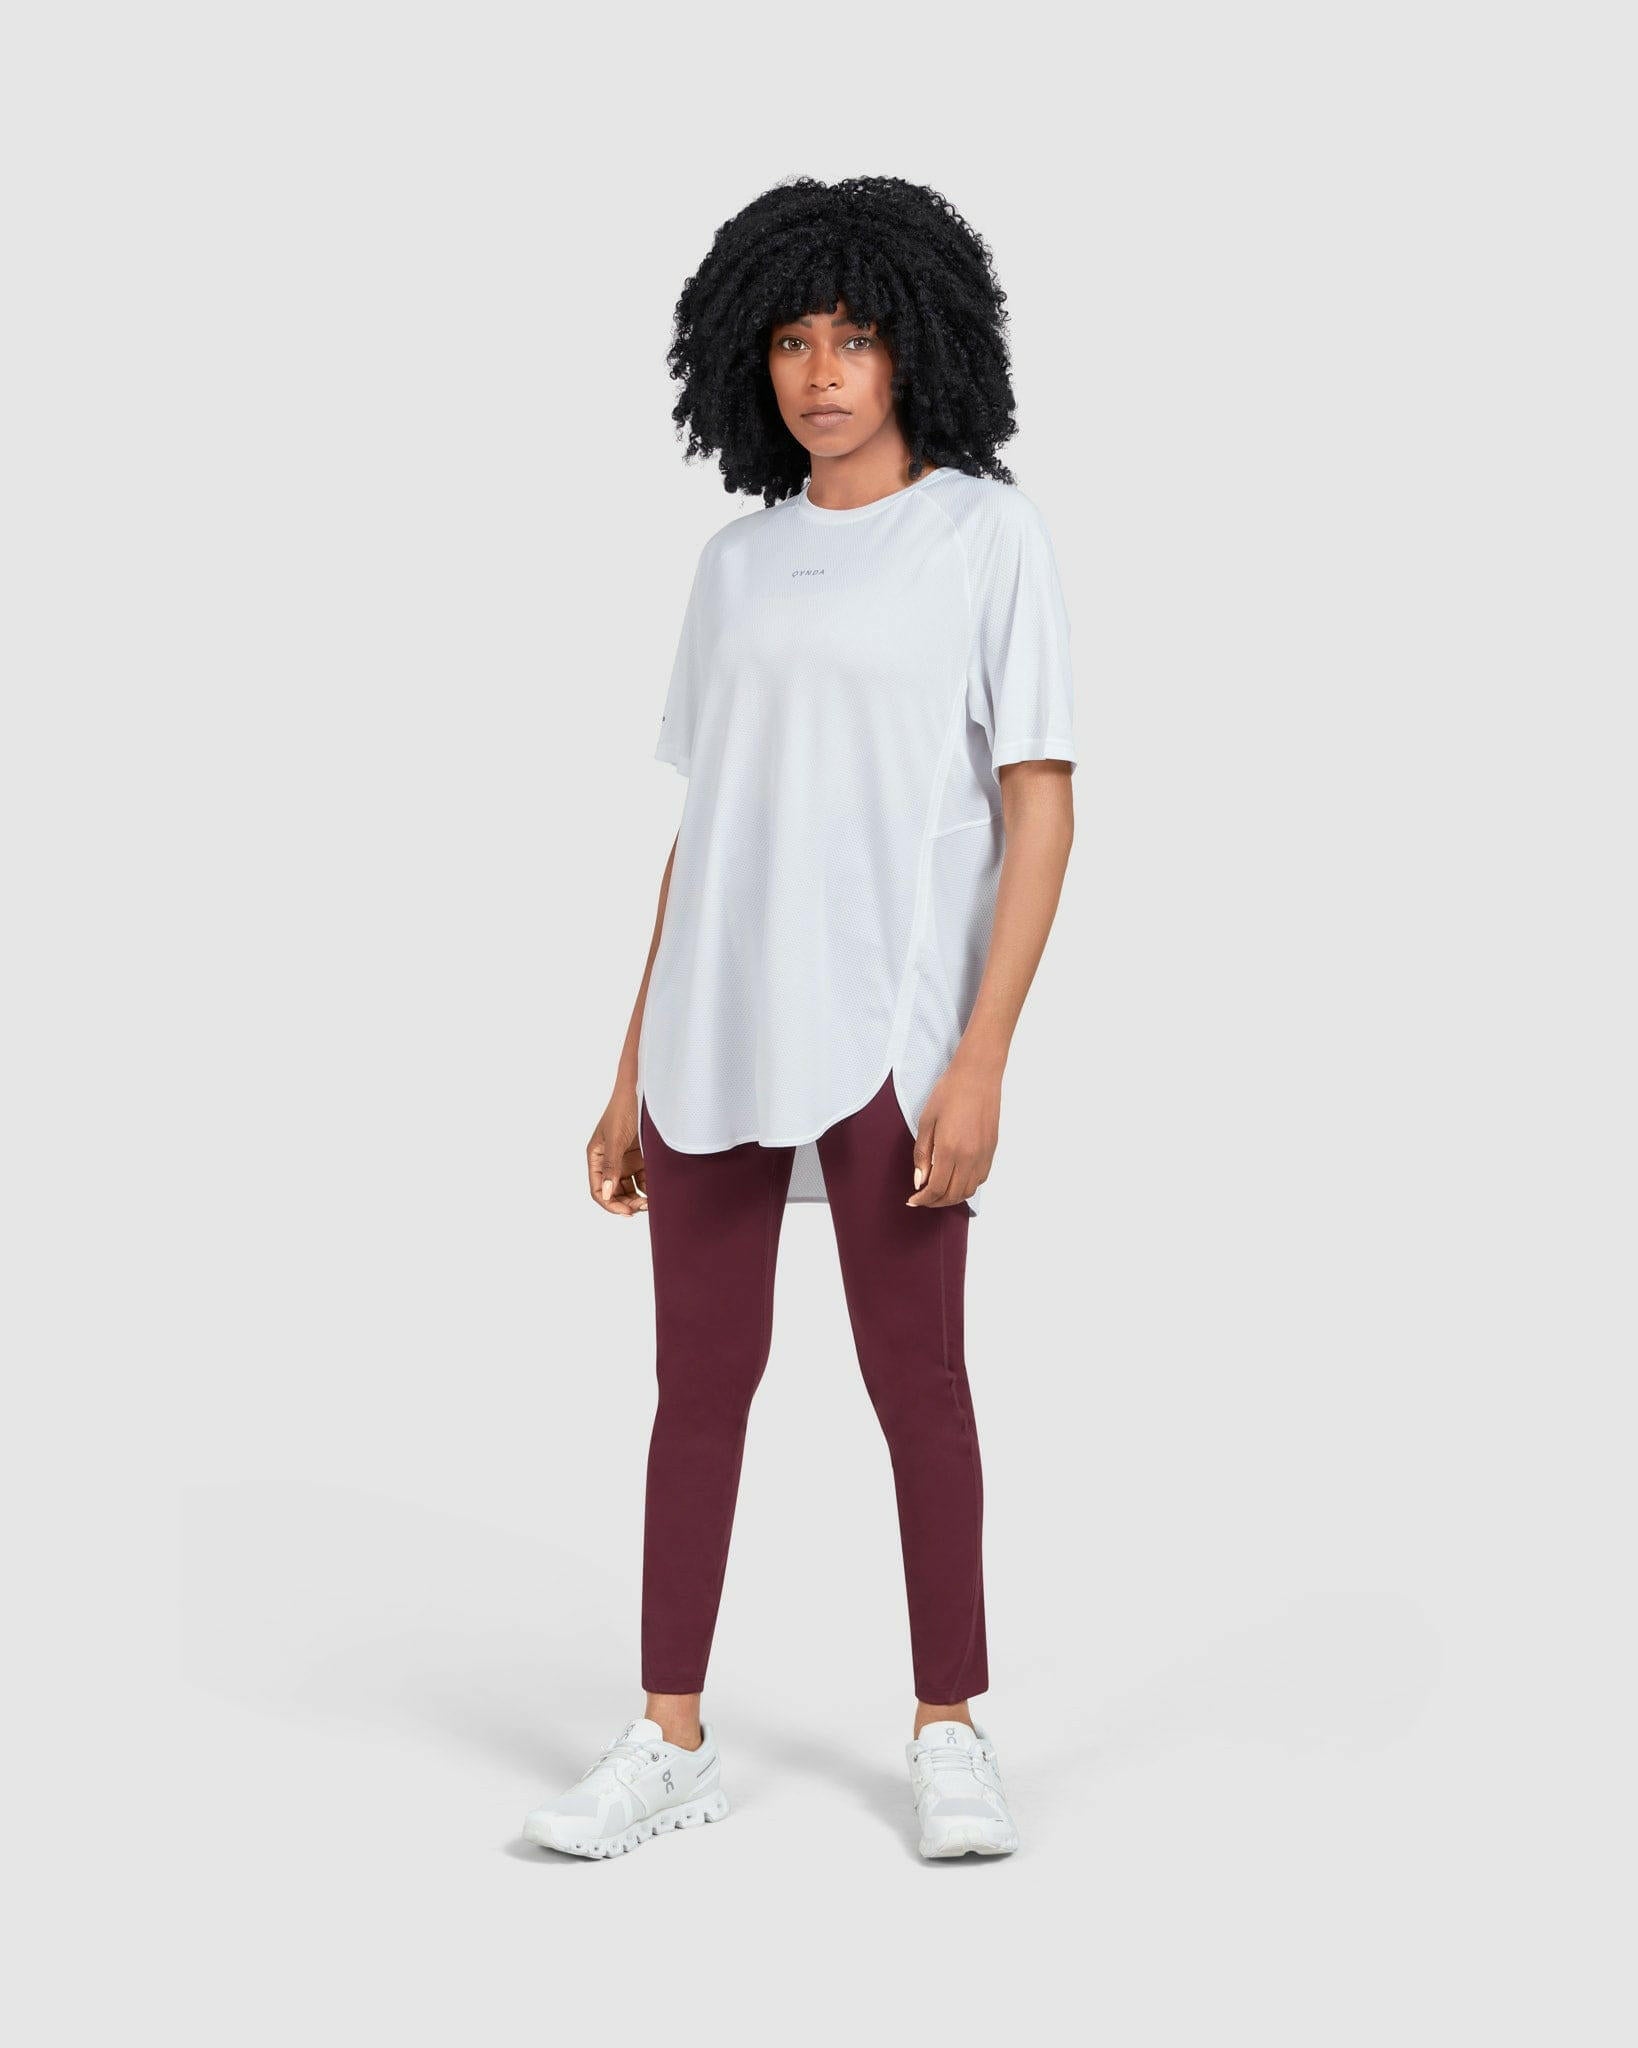 A young woman in a casual short-sleeved white BREATHE T-SHIRT with qynda logo and maroon leggings standing against a white background, wearing white sneakers, embodying a simple, sporty, and comfortable style.